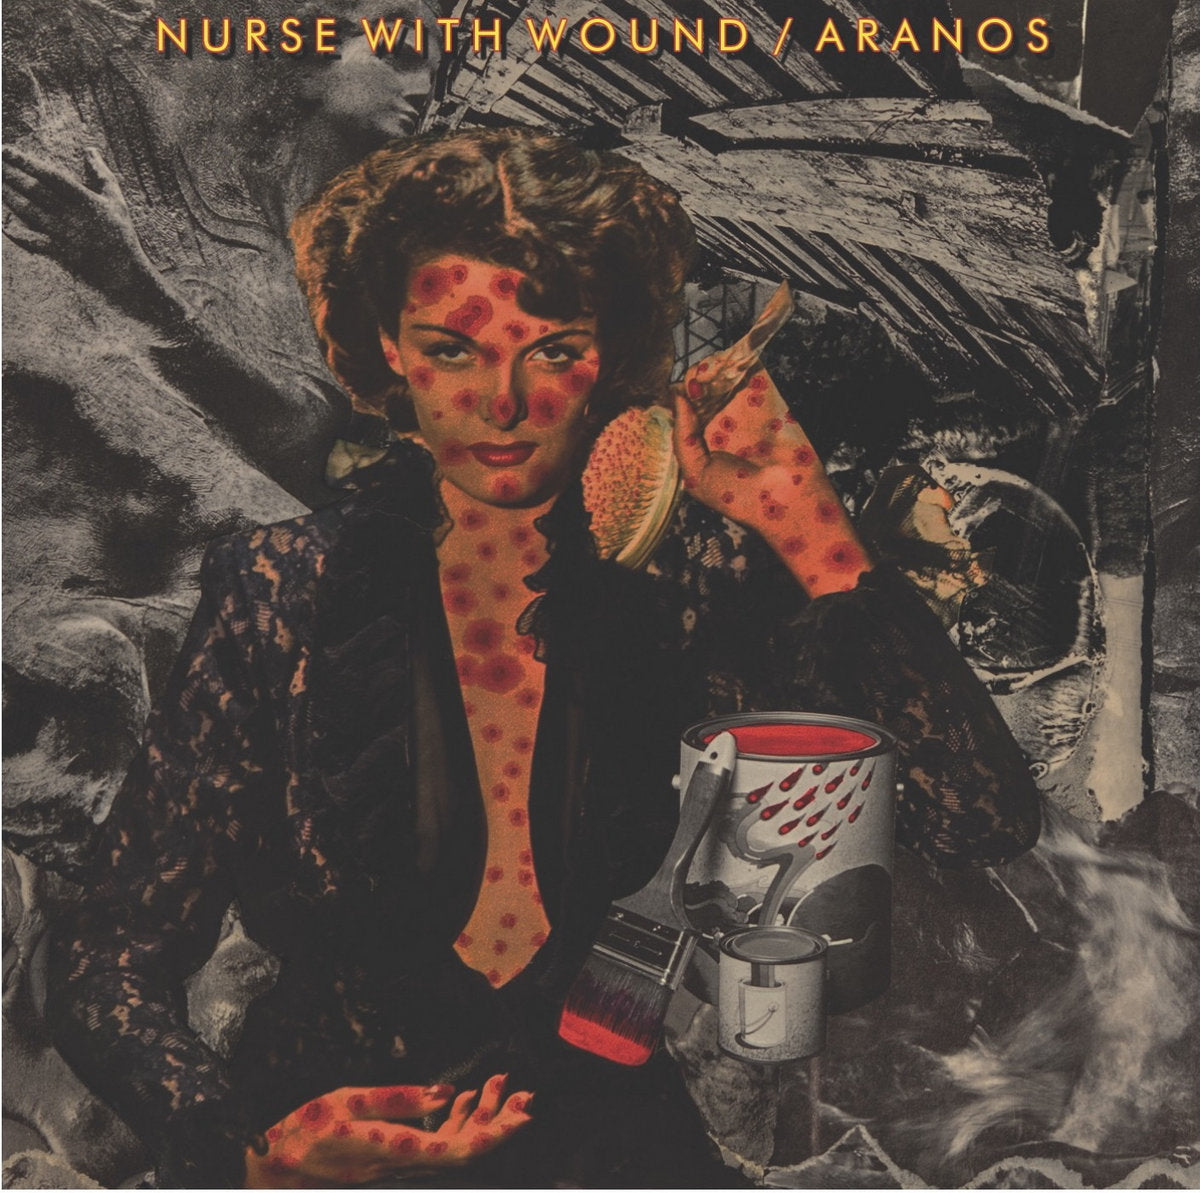 Nurse With Wound / Aranos - Acts Of Senseless Beauty / Santoor Lena Bicycle - 2CD